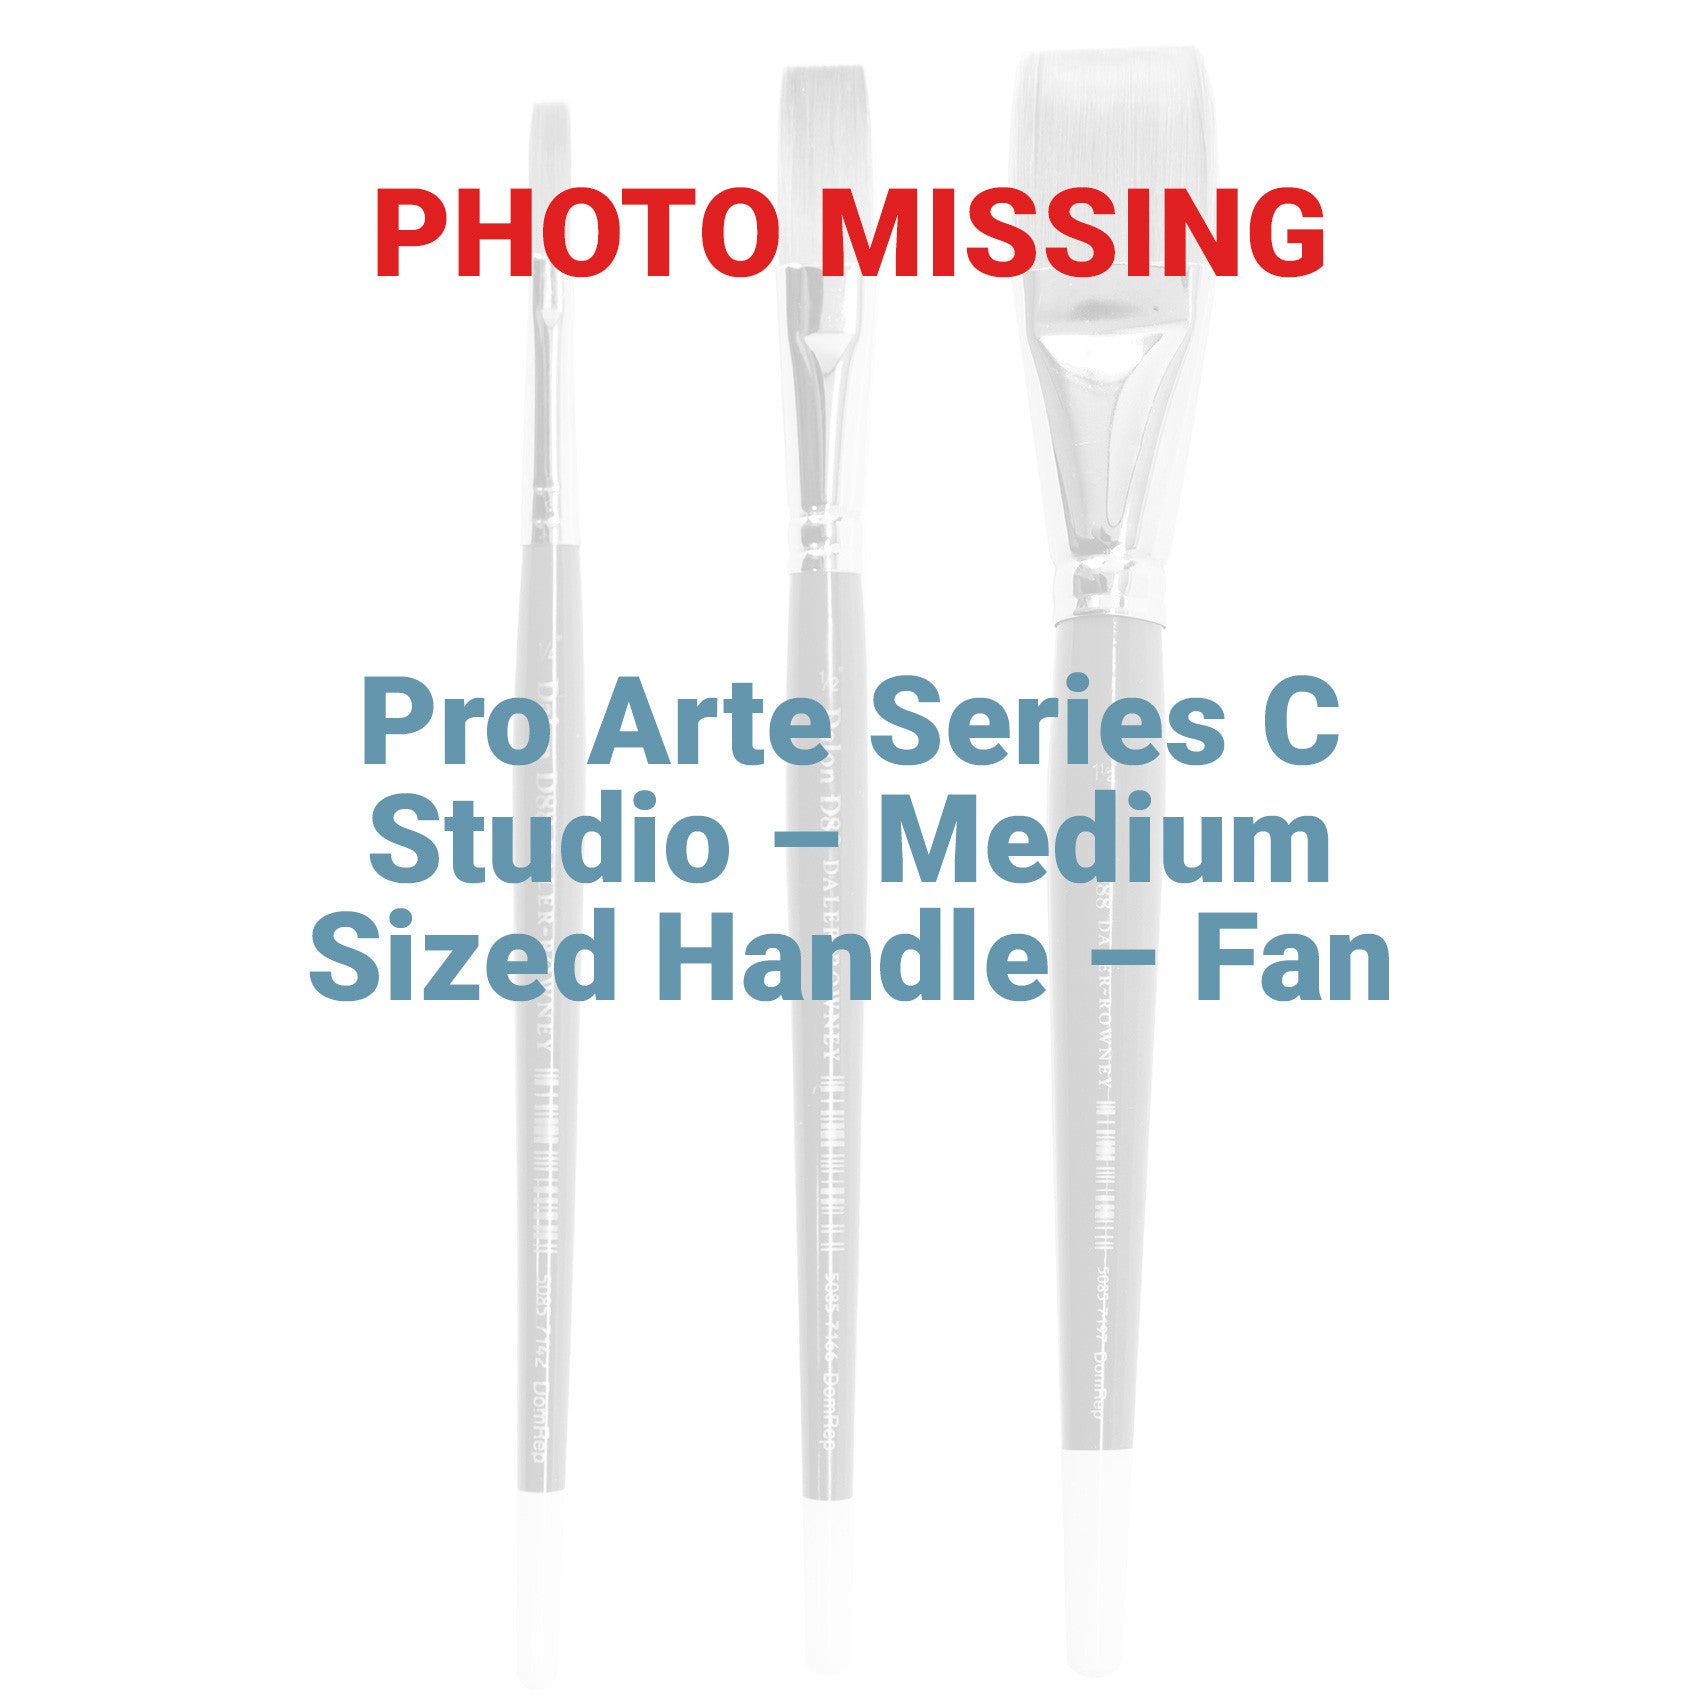 The Pro Arte Series C Studio Hog features four distinct shapes - Rounds, Flats, Filberts and Fans - for an affordable price. All are great for student painters and feature seamless nickel ferrules. The Medium size handles are sealed with a blue lacquer finish.